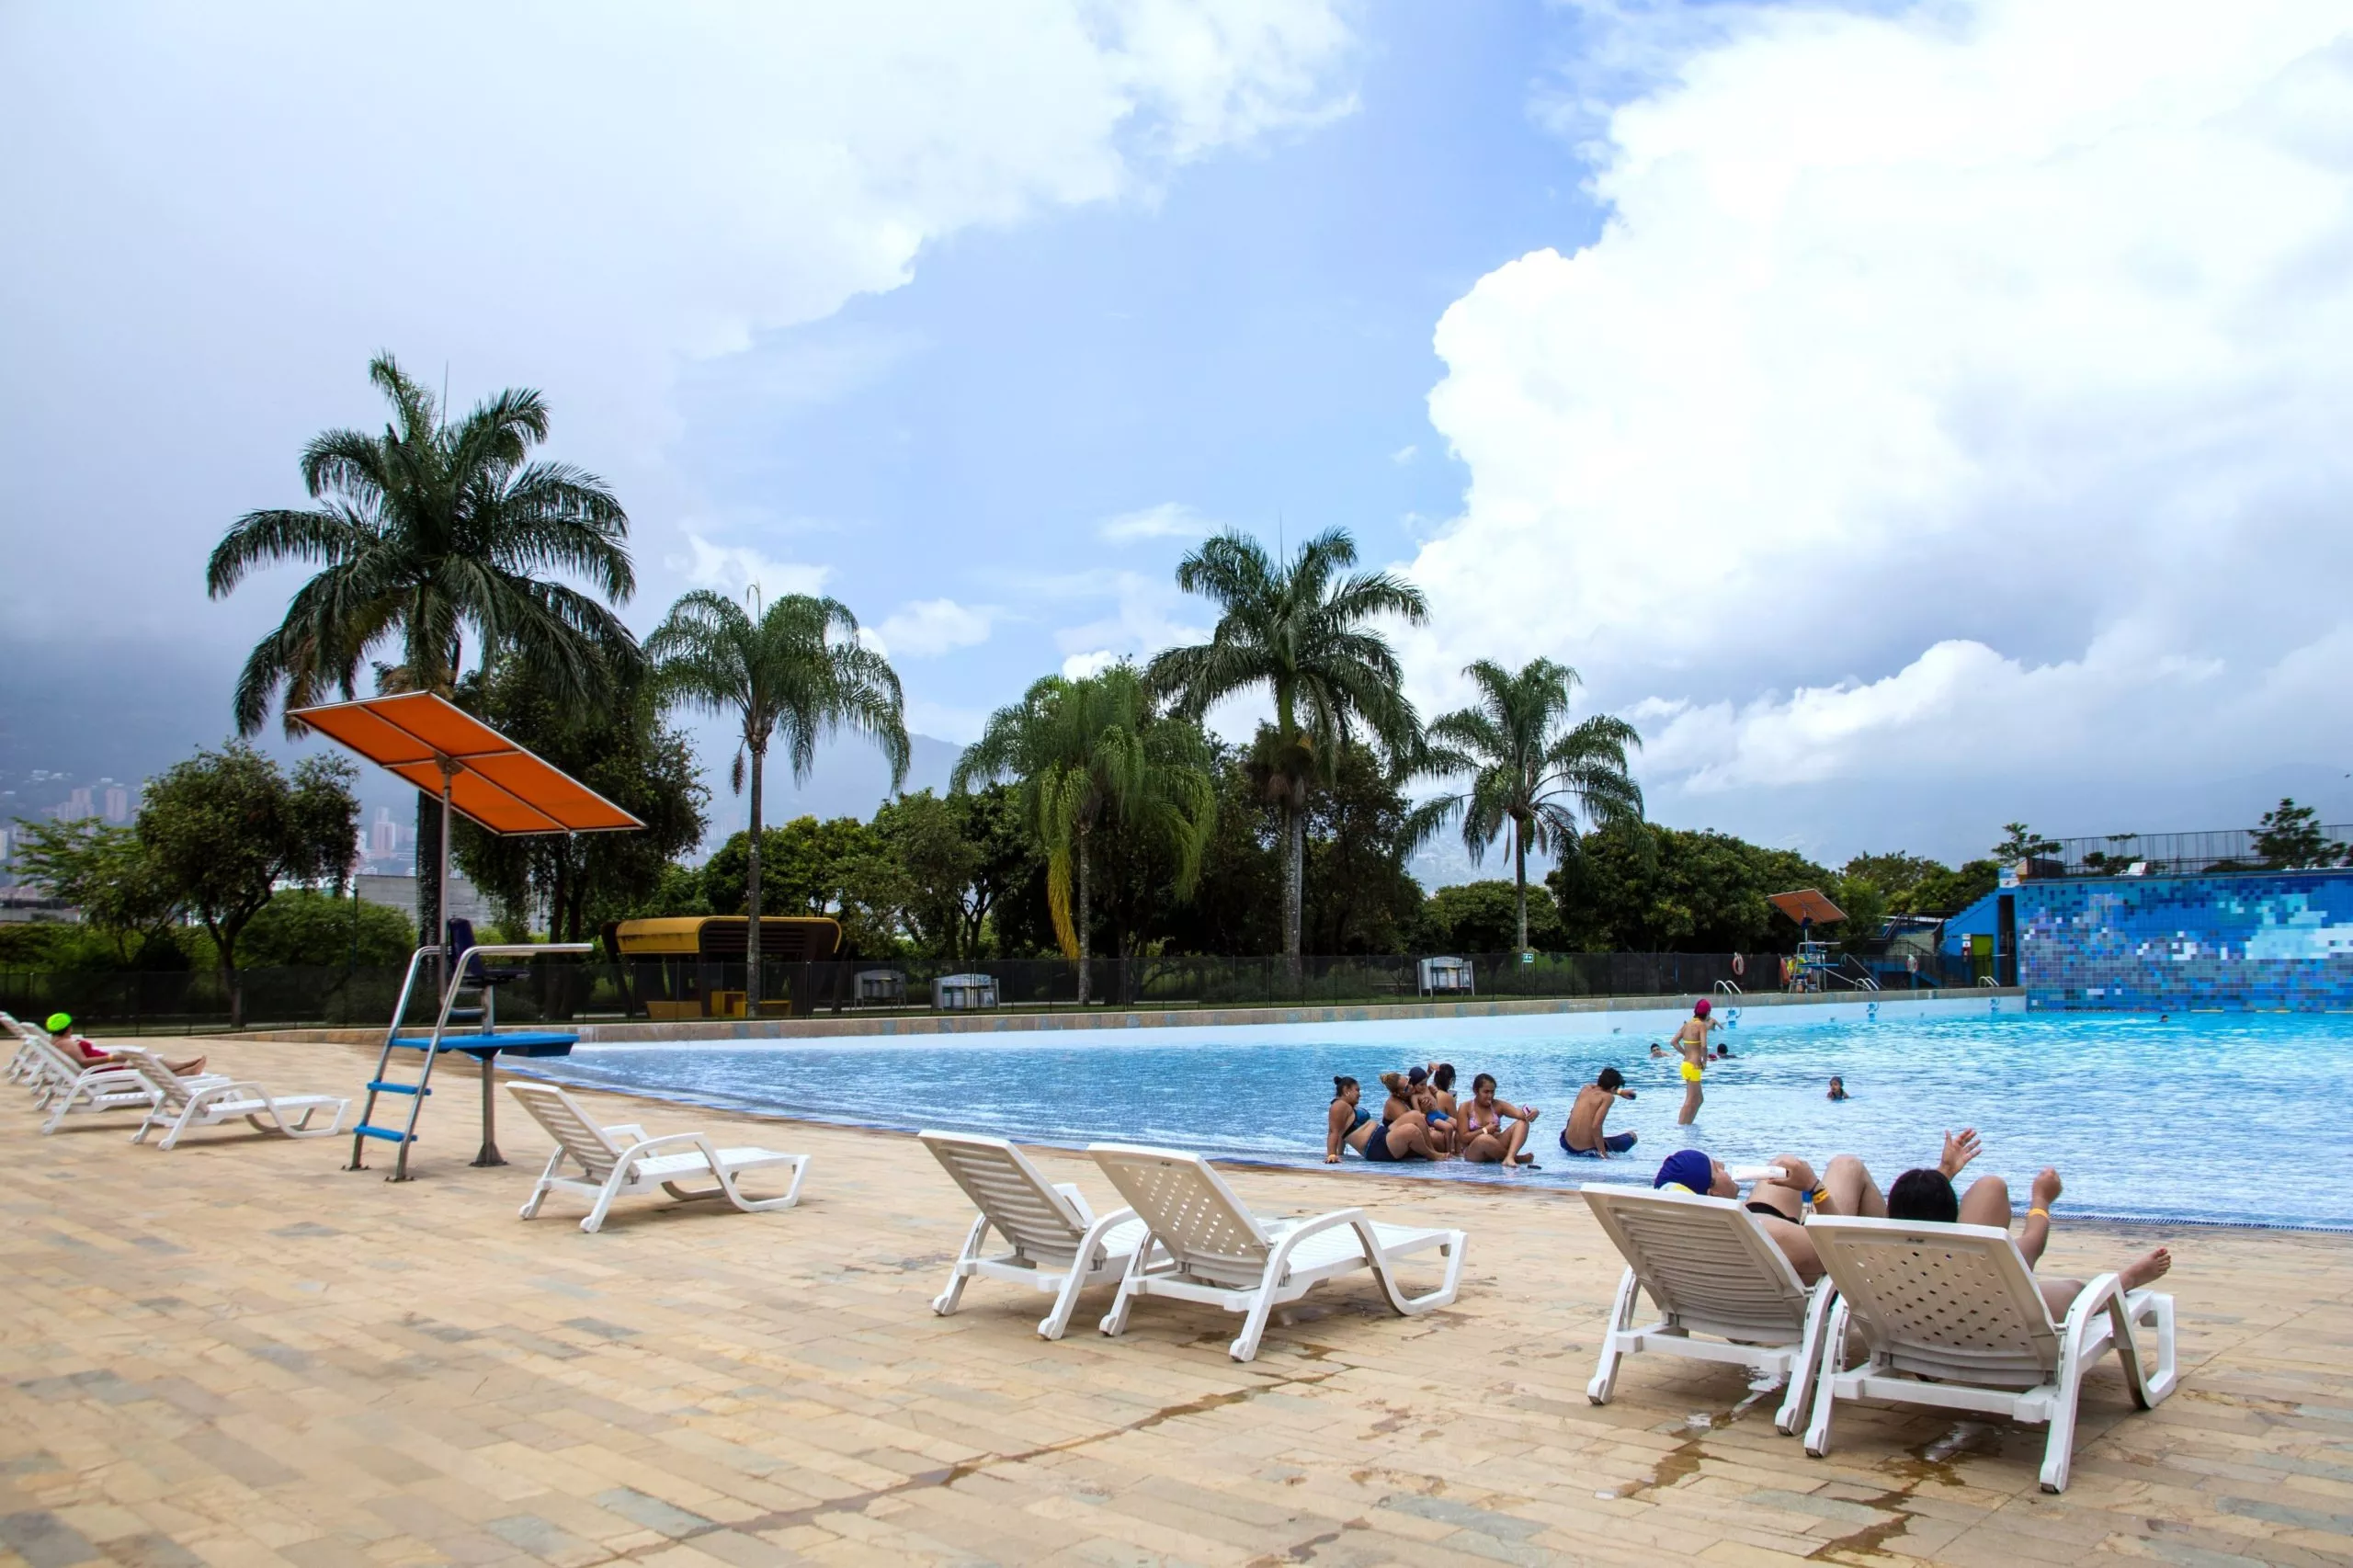 Juan Pablo II Airport in Colombia, South America | Water Parks - Rated 4.5